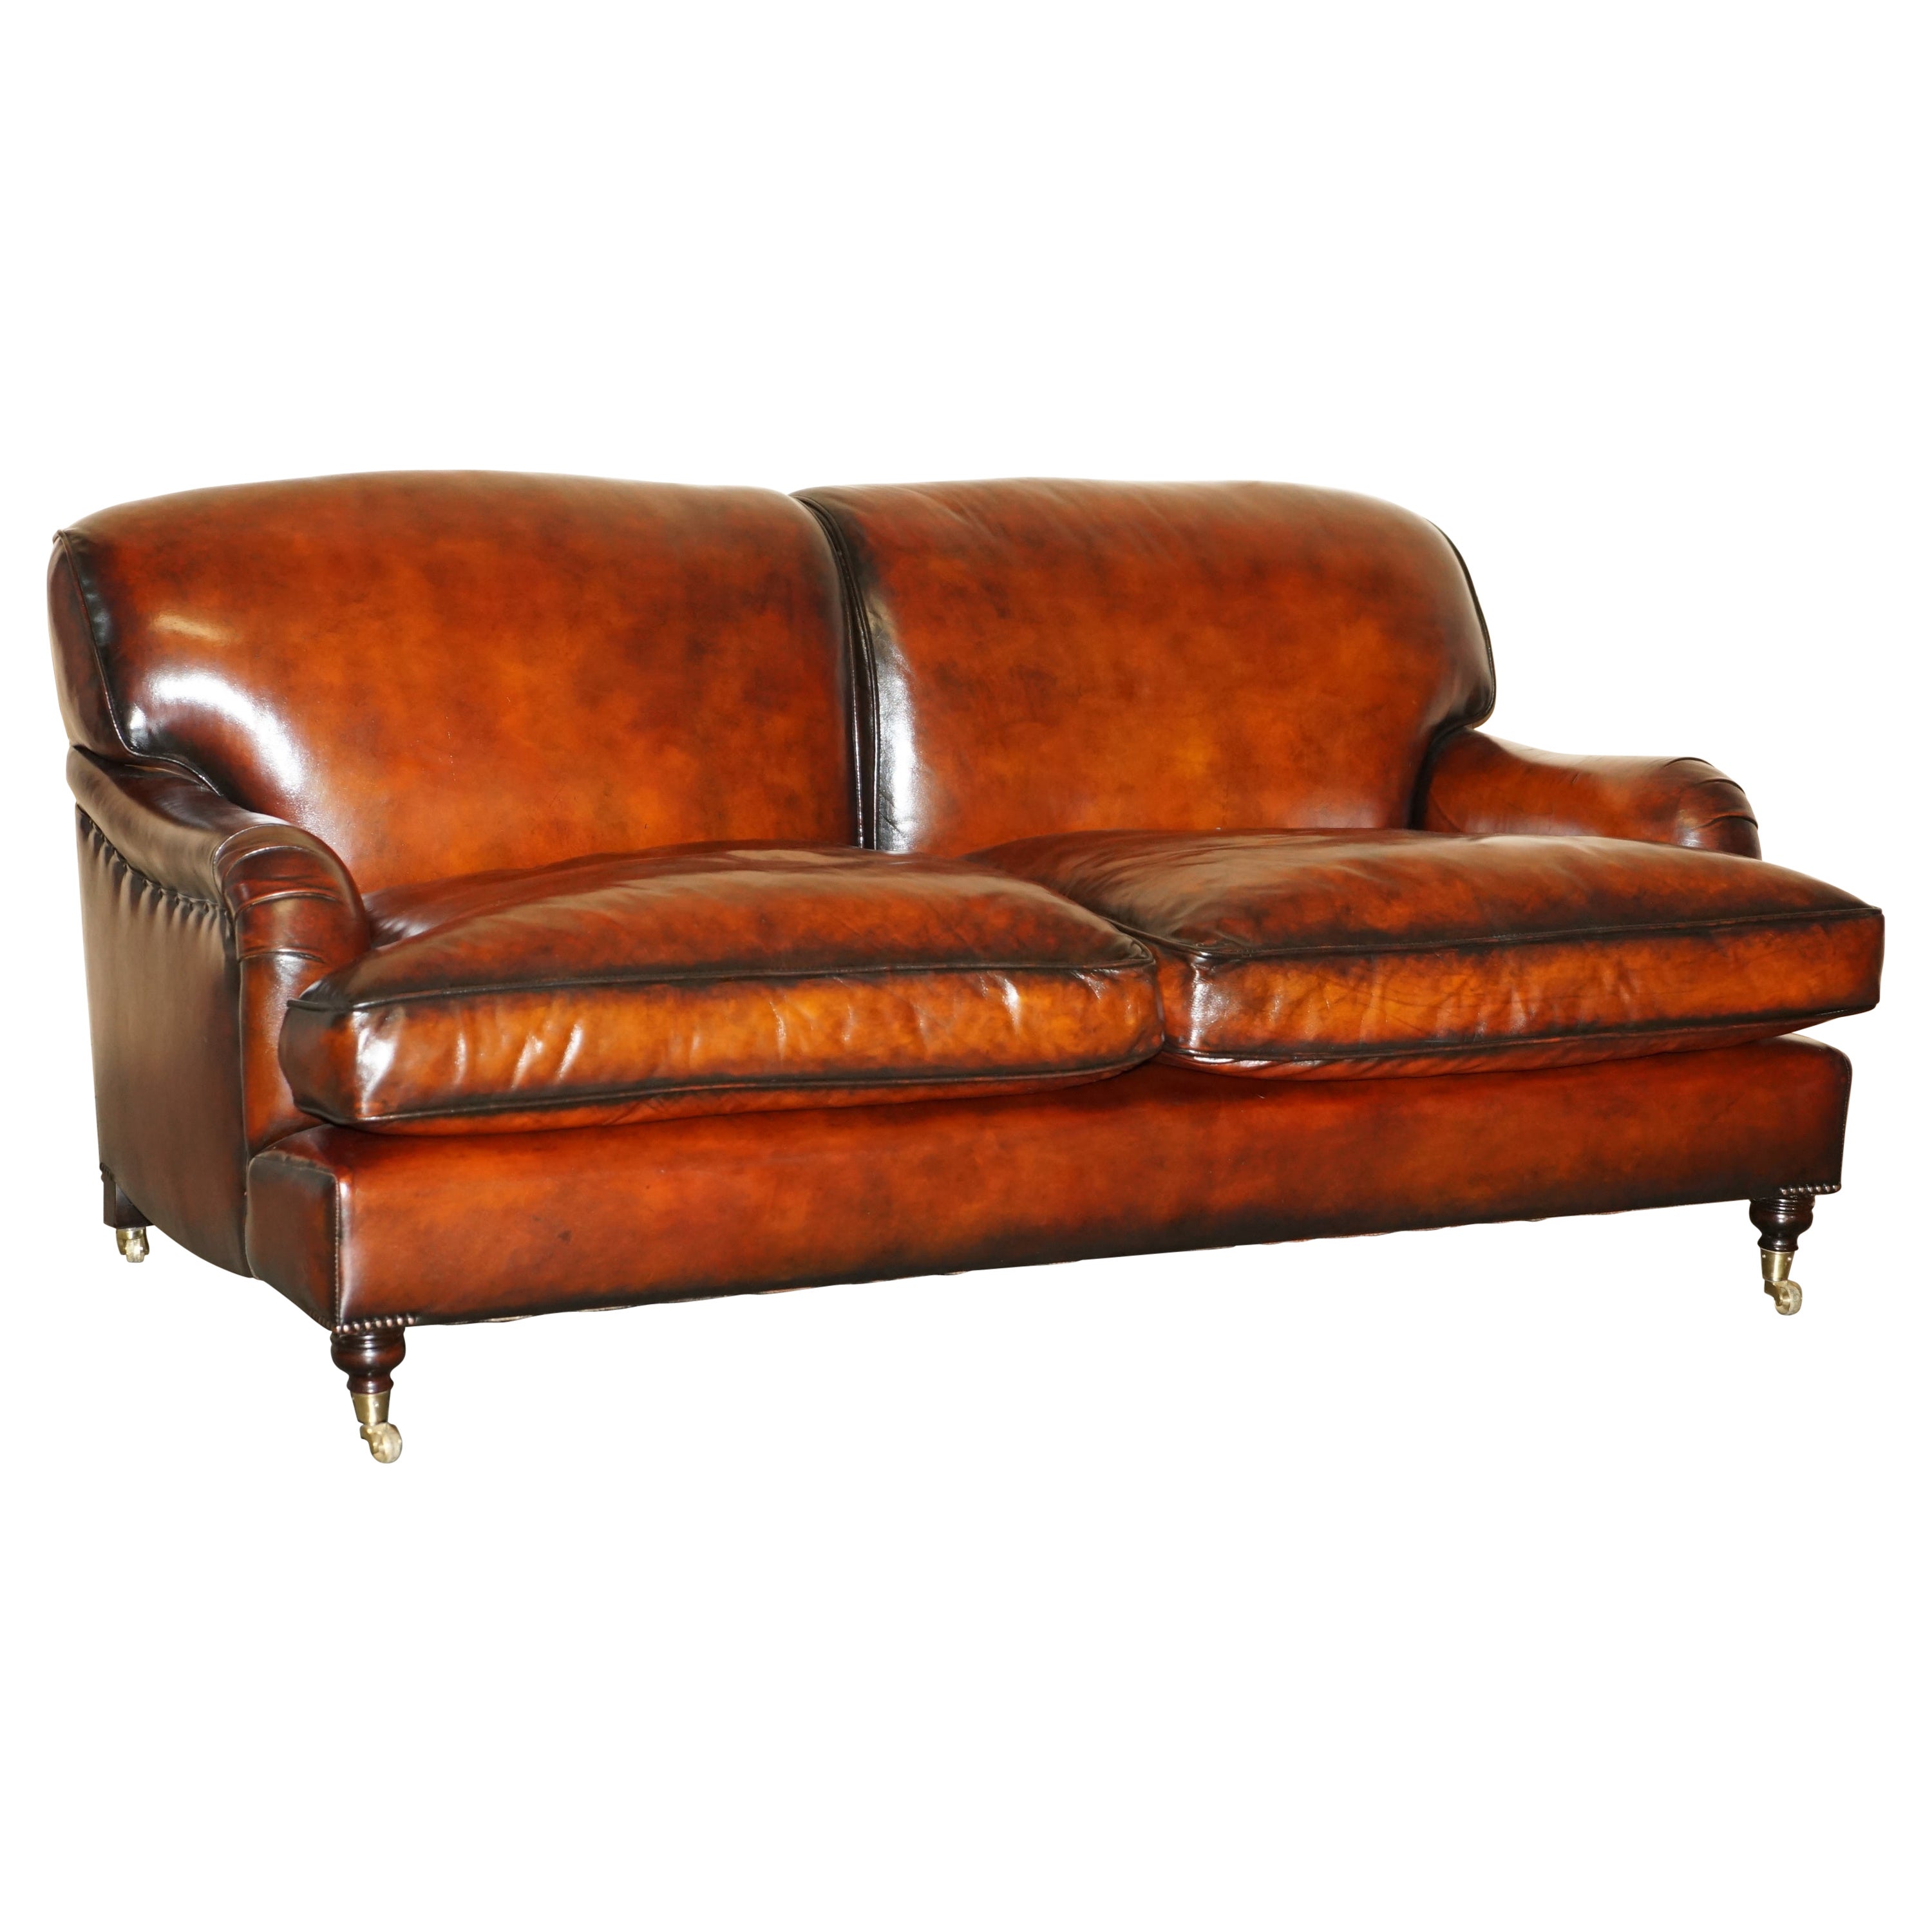 RESTORED GEORGE SMITH HOWARD & SON'S STYLE BROWN LEATHER SiGNATURE SCROLL SOFA